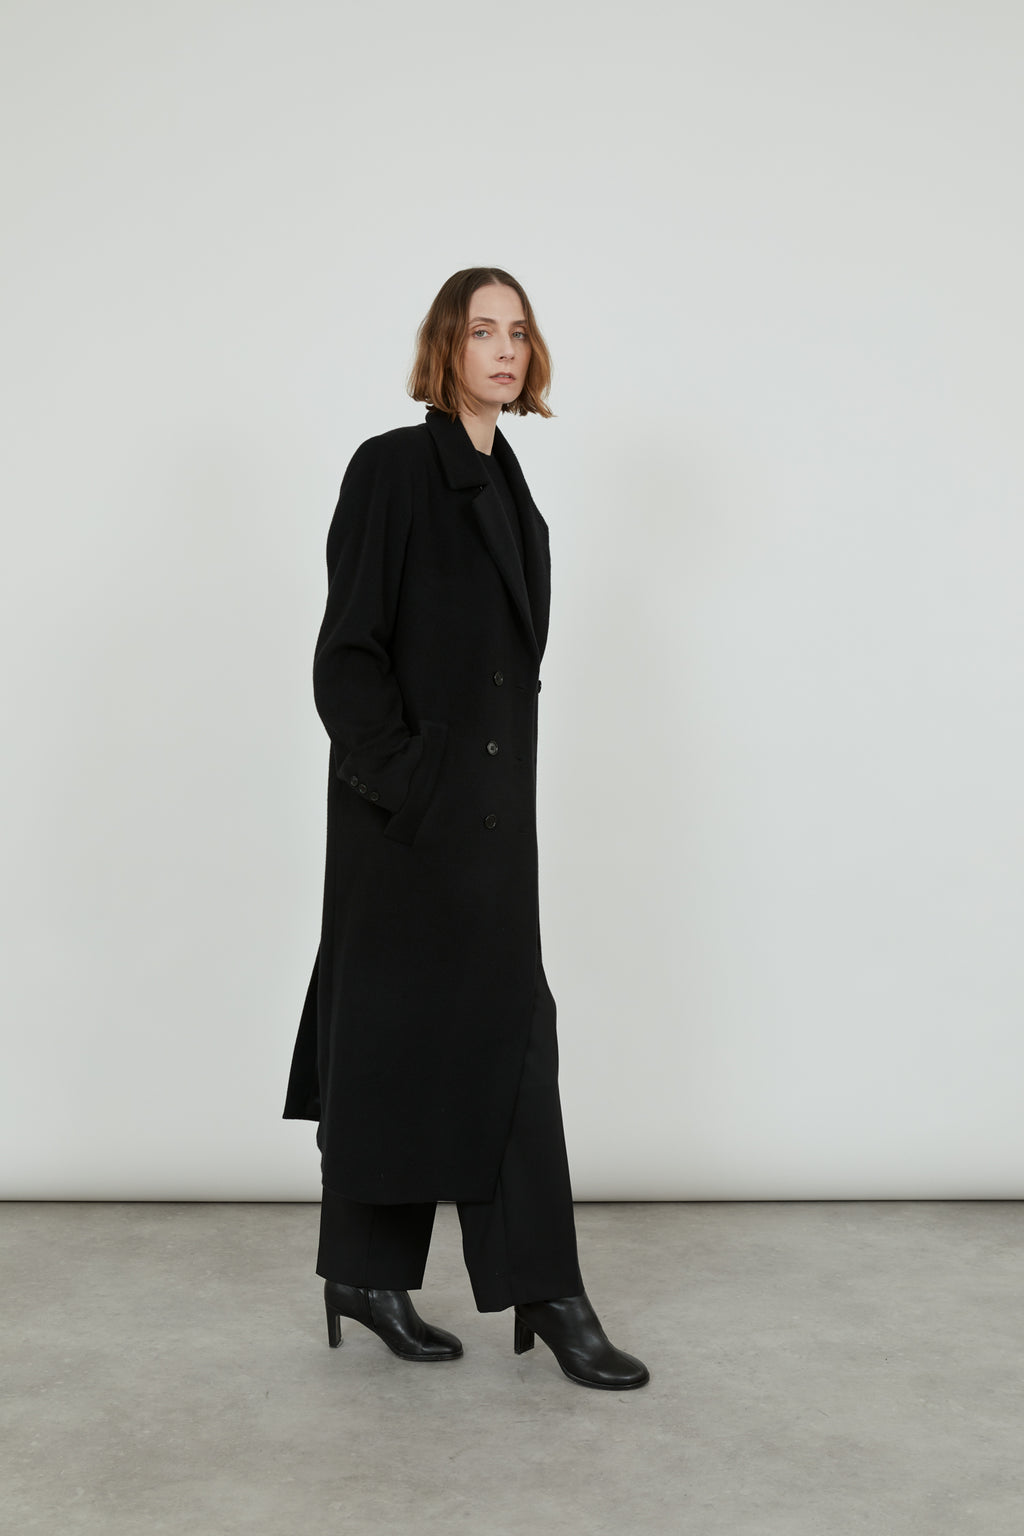 A person wearing a black cashmere Achilles overcoat.